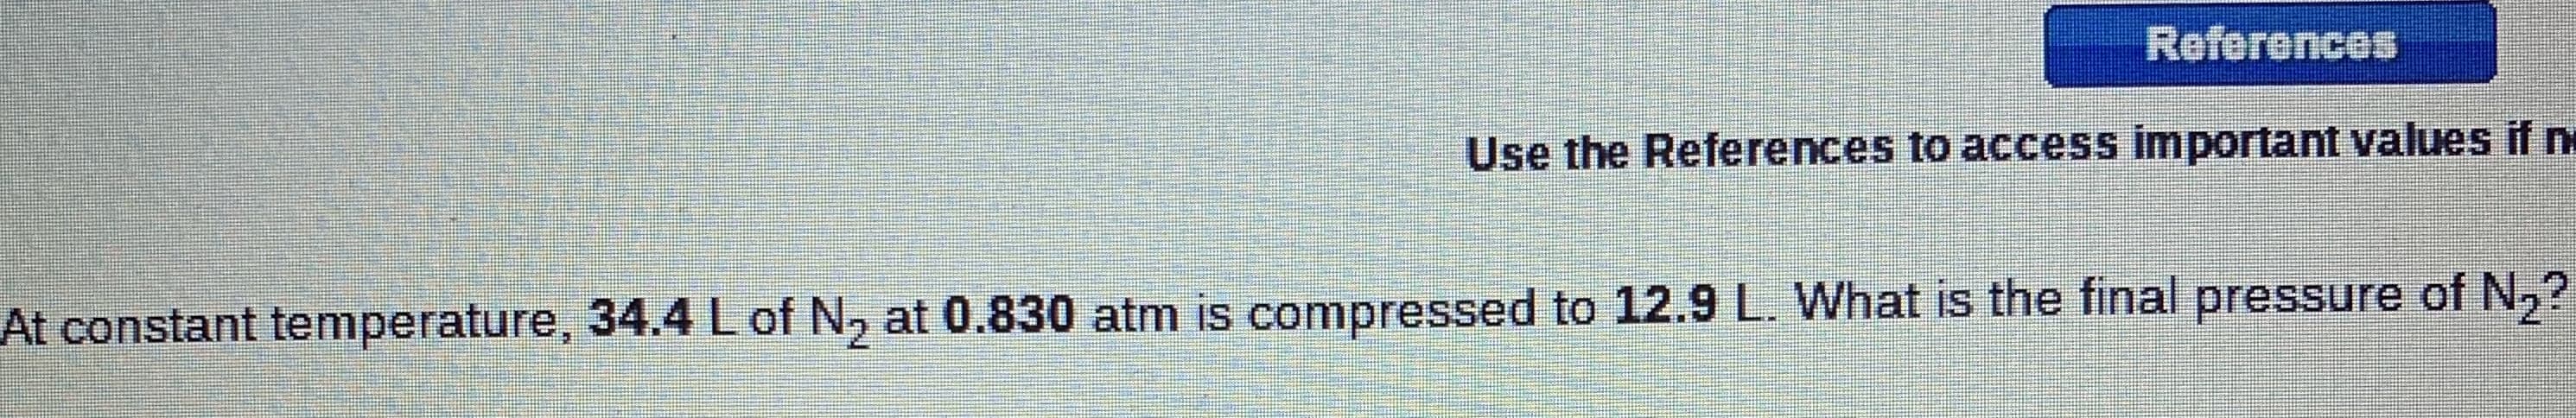 References
Use the References to access important values if n
At constant temperature, 34.4 L of N, at 0.830 atm is compressed to 12.9 L. What is the final pressure of N,?
